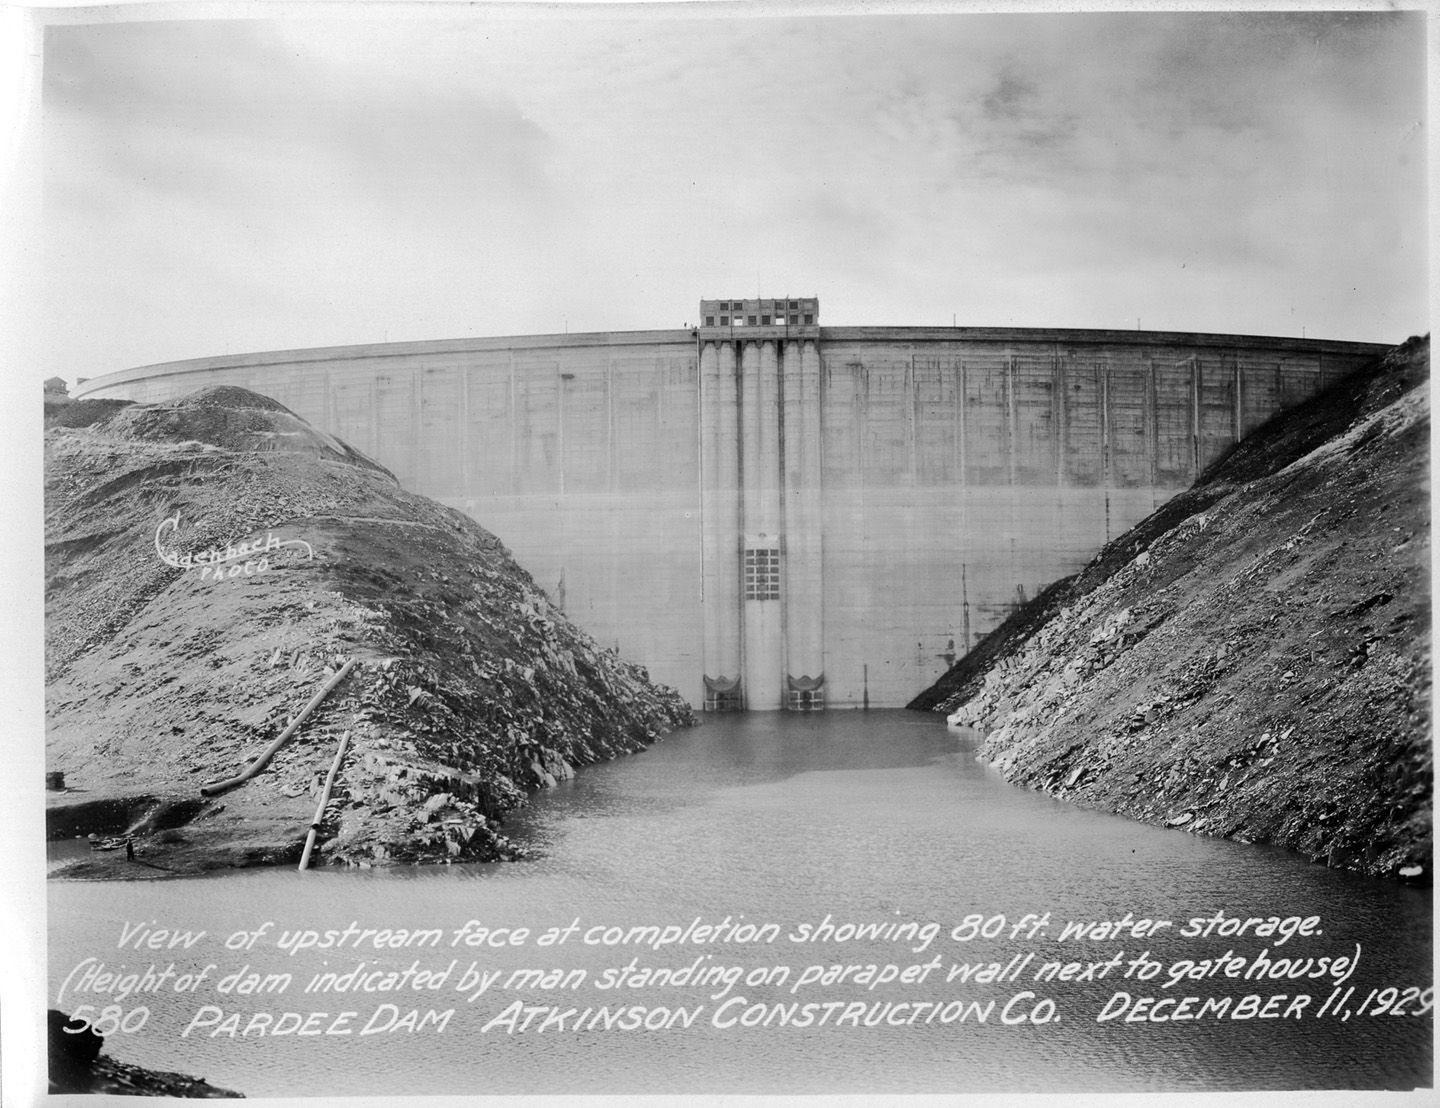 View of upstream face at completion showing 80 ft. water storage. (Height of dam indicated by man standing on parpet wall next to gatehouse). (December 1929)	